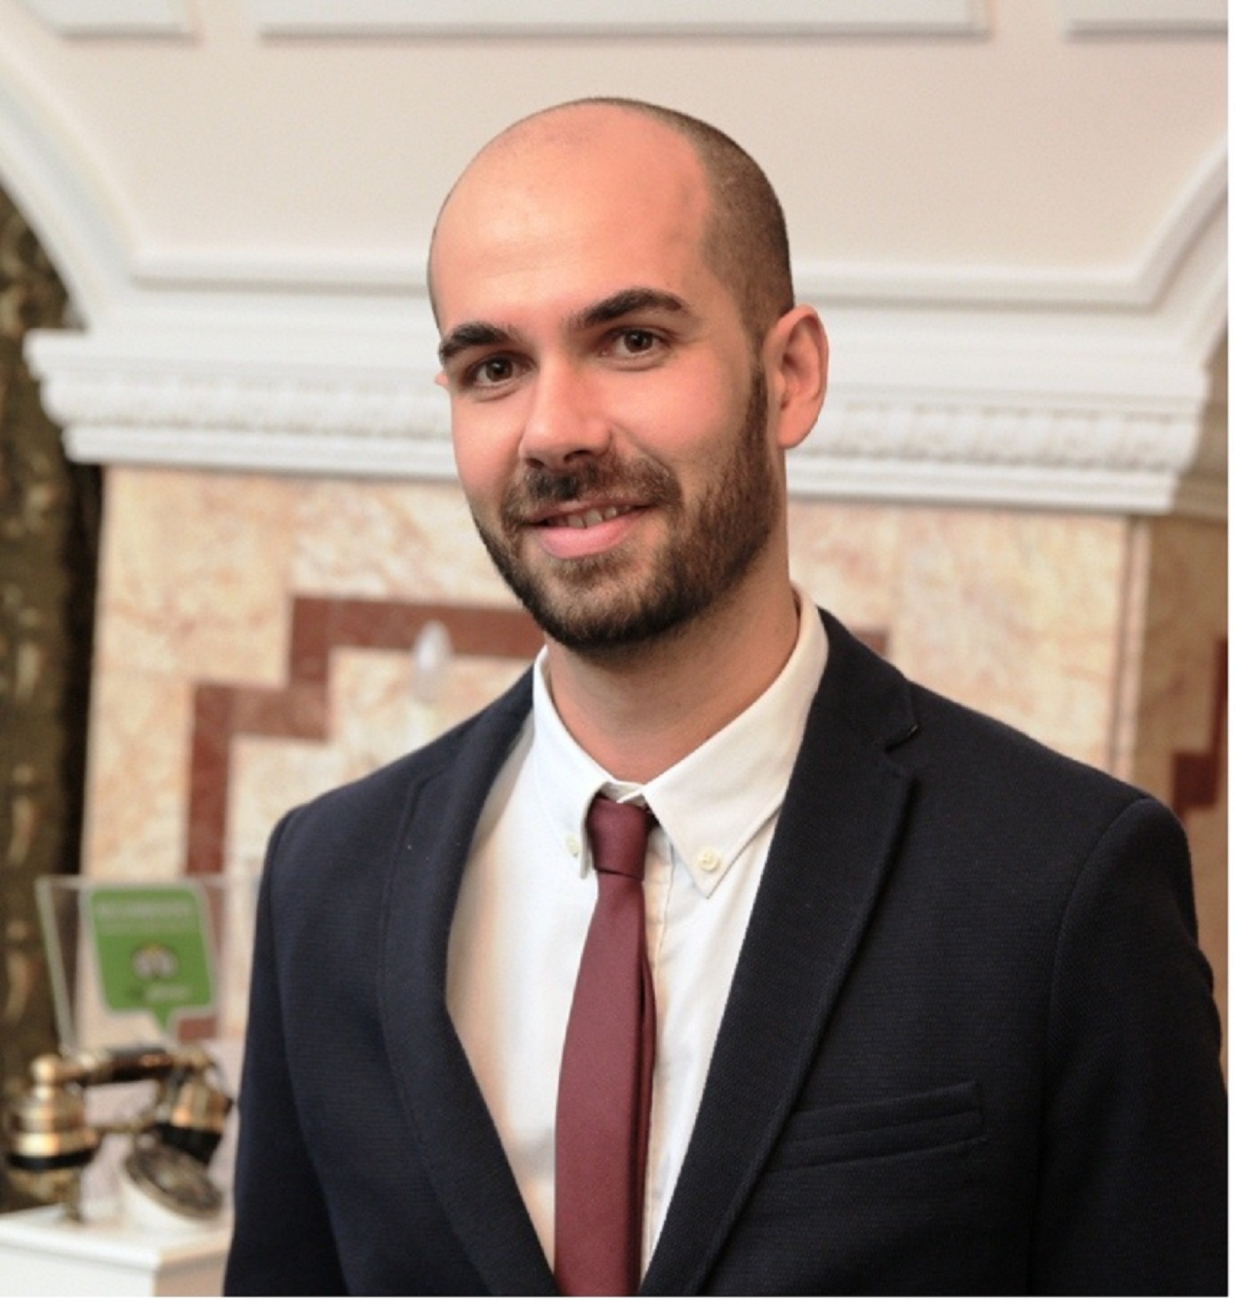 FABIO MORANDIN, CEO OF MOREHOTELIER: Applying Revenue Management techniques to hotels to achieve the best possible financial results